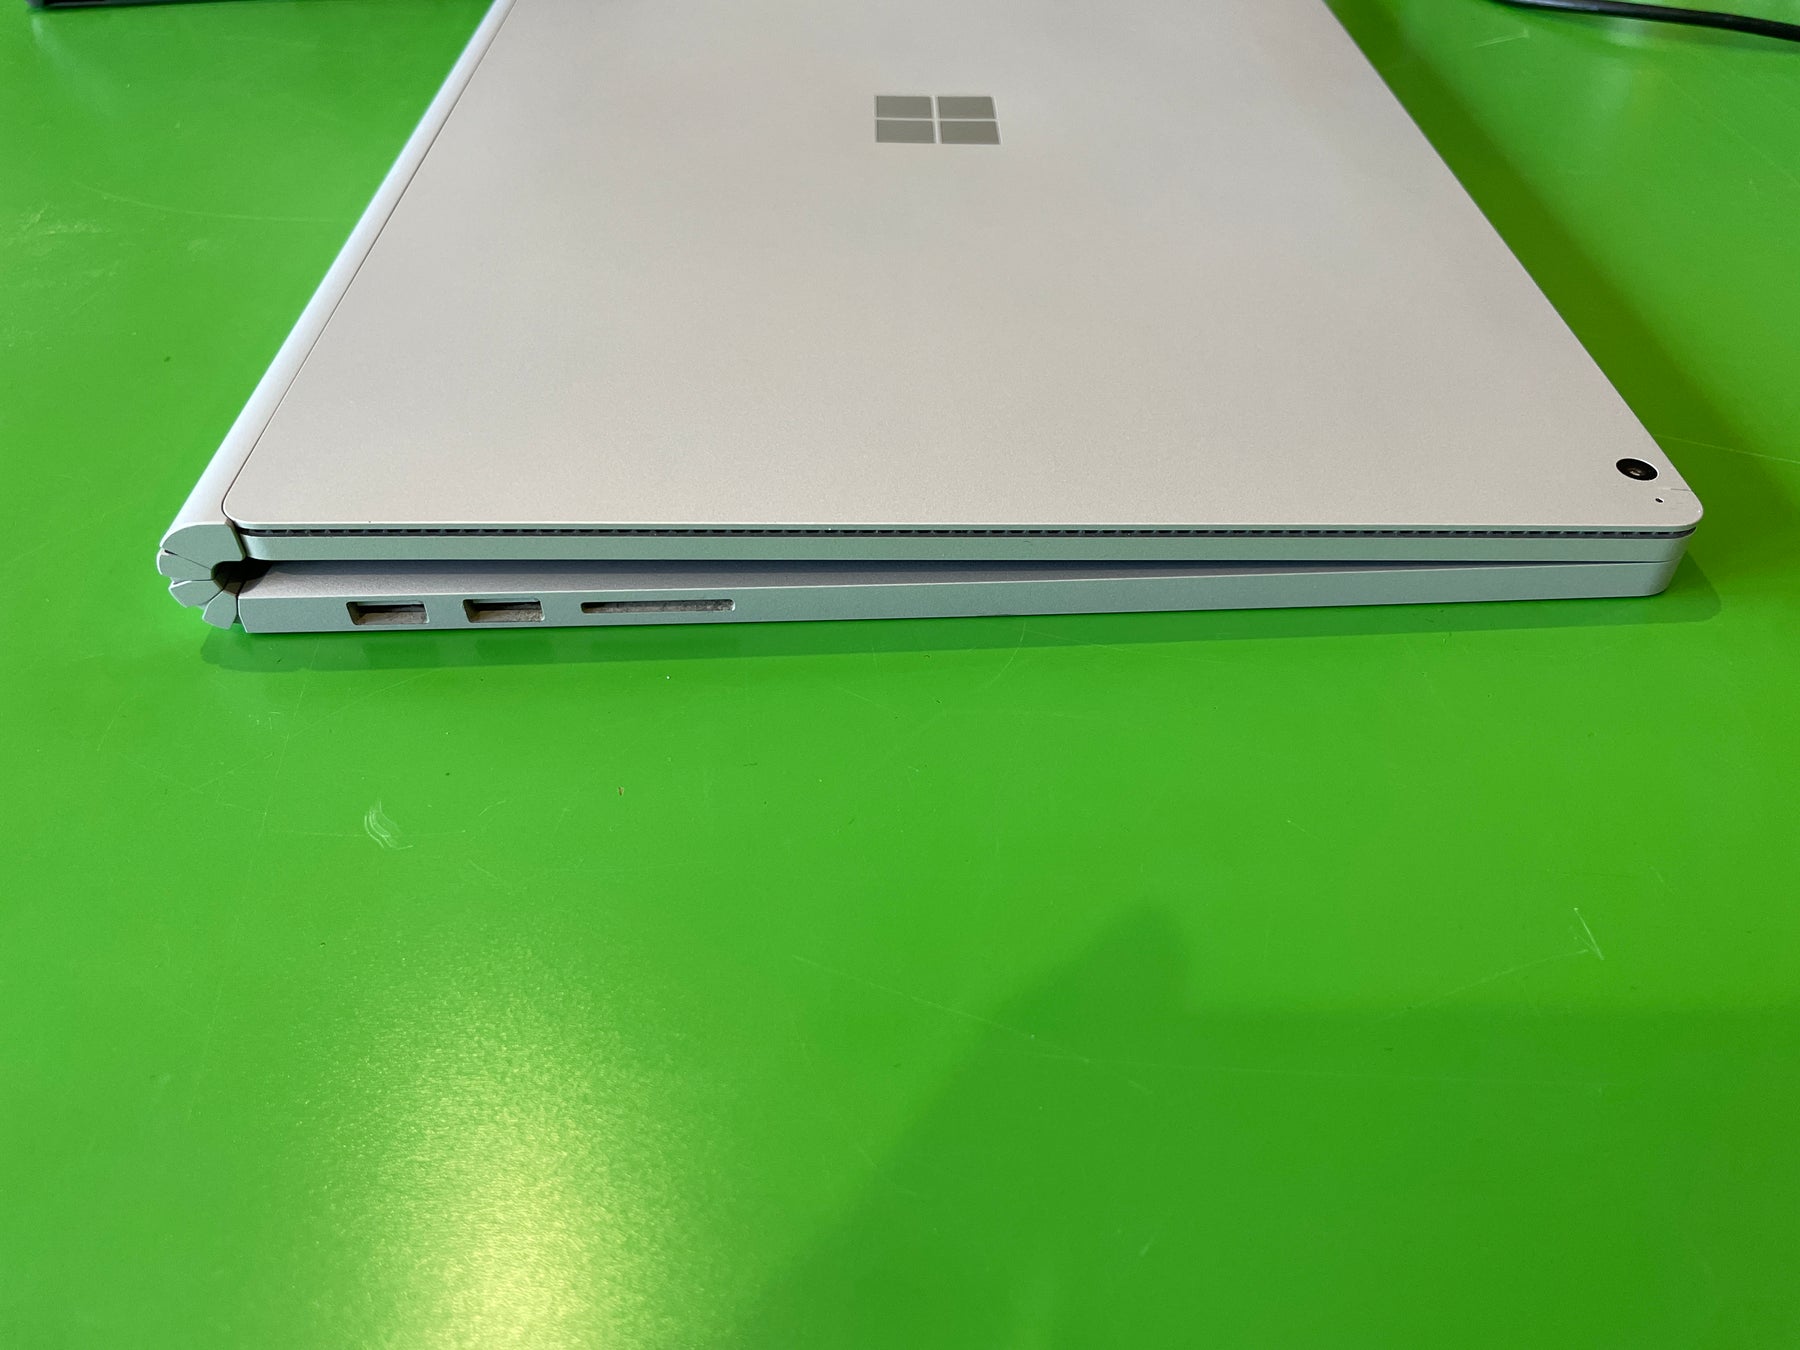 Microsoft Surface Book 2 15" Laptop - Very Good Condition